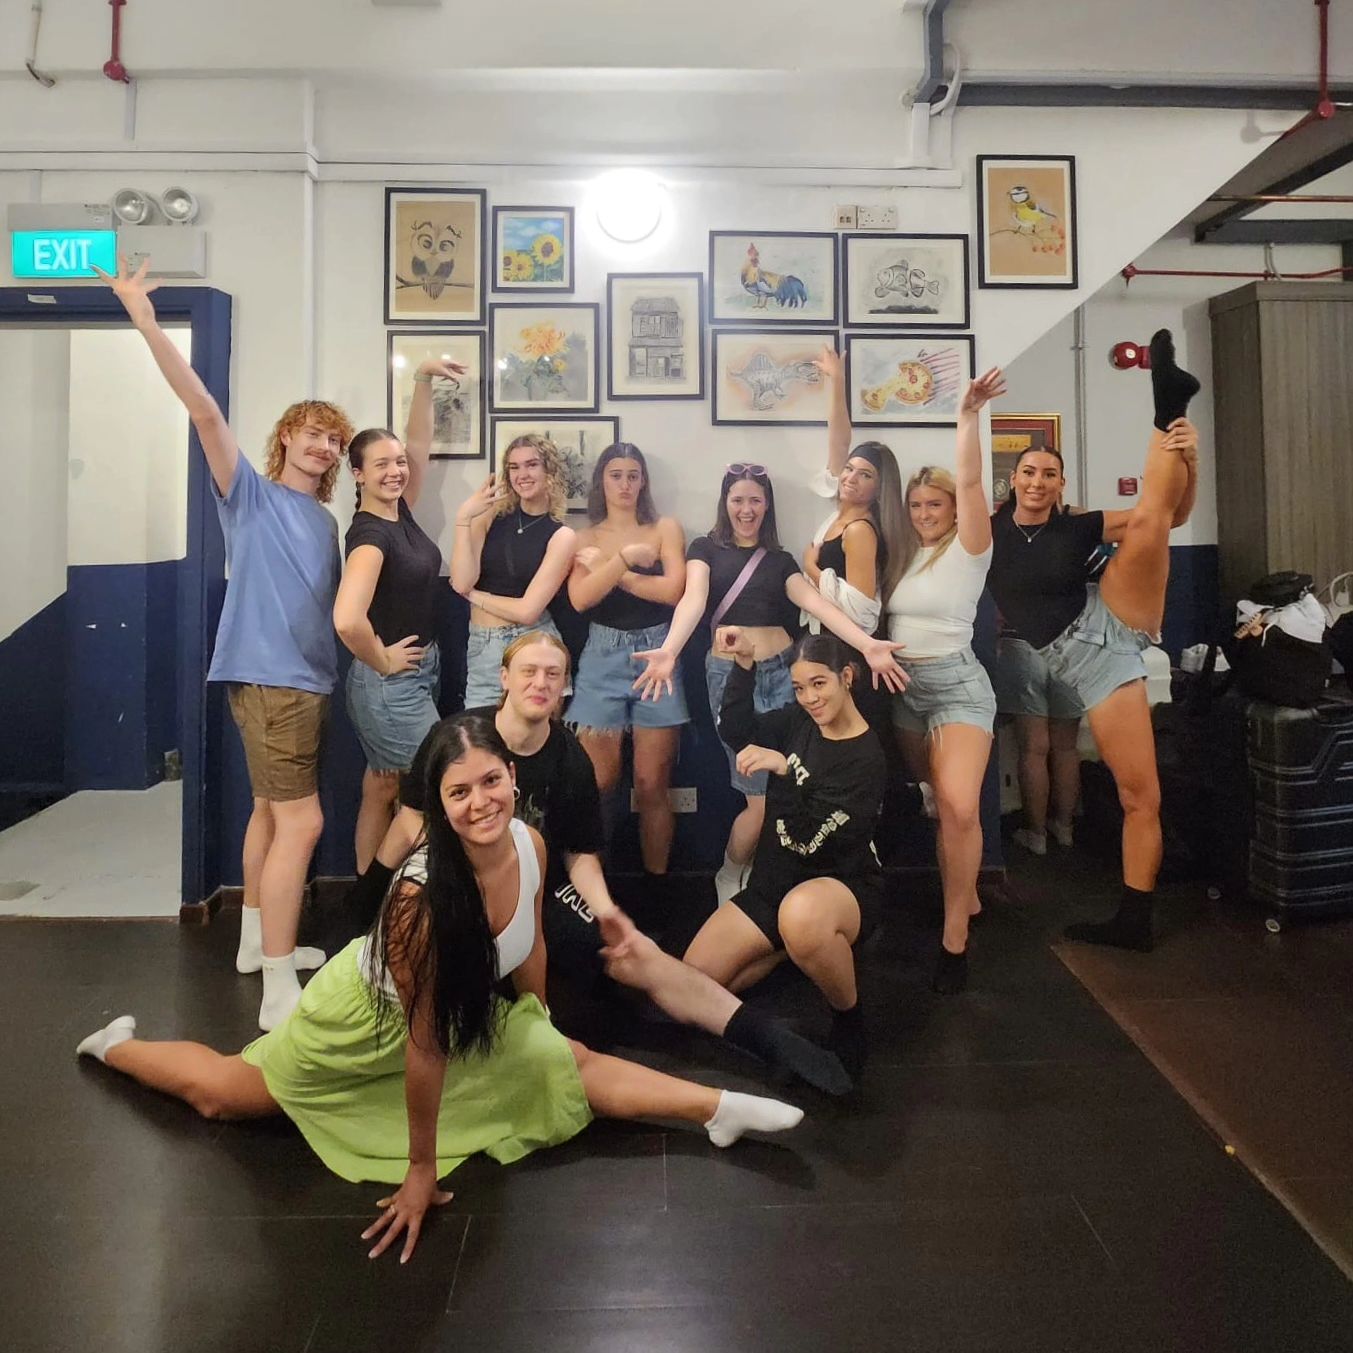 So honored to be accommodation providers to Misnitry of Dance during their trip to Singapore! Dancing all the way from Australia to Malaysia to Singapore and more!